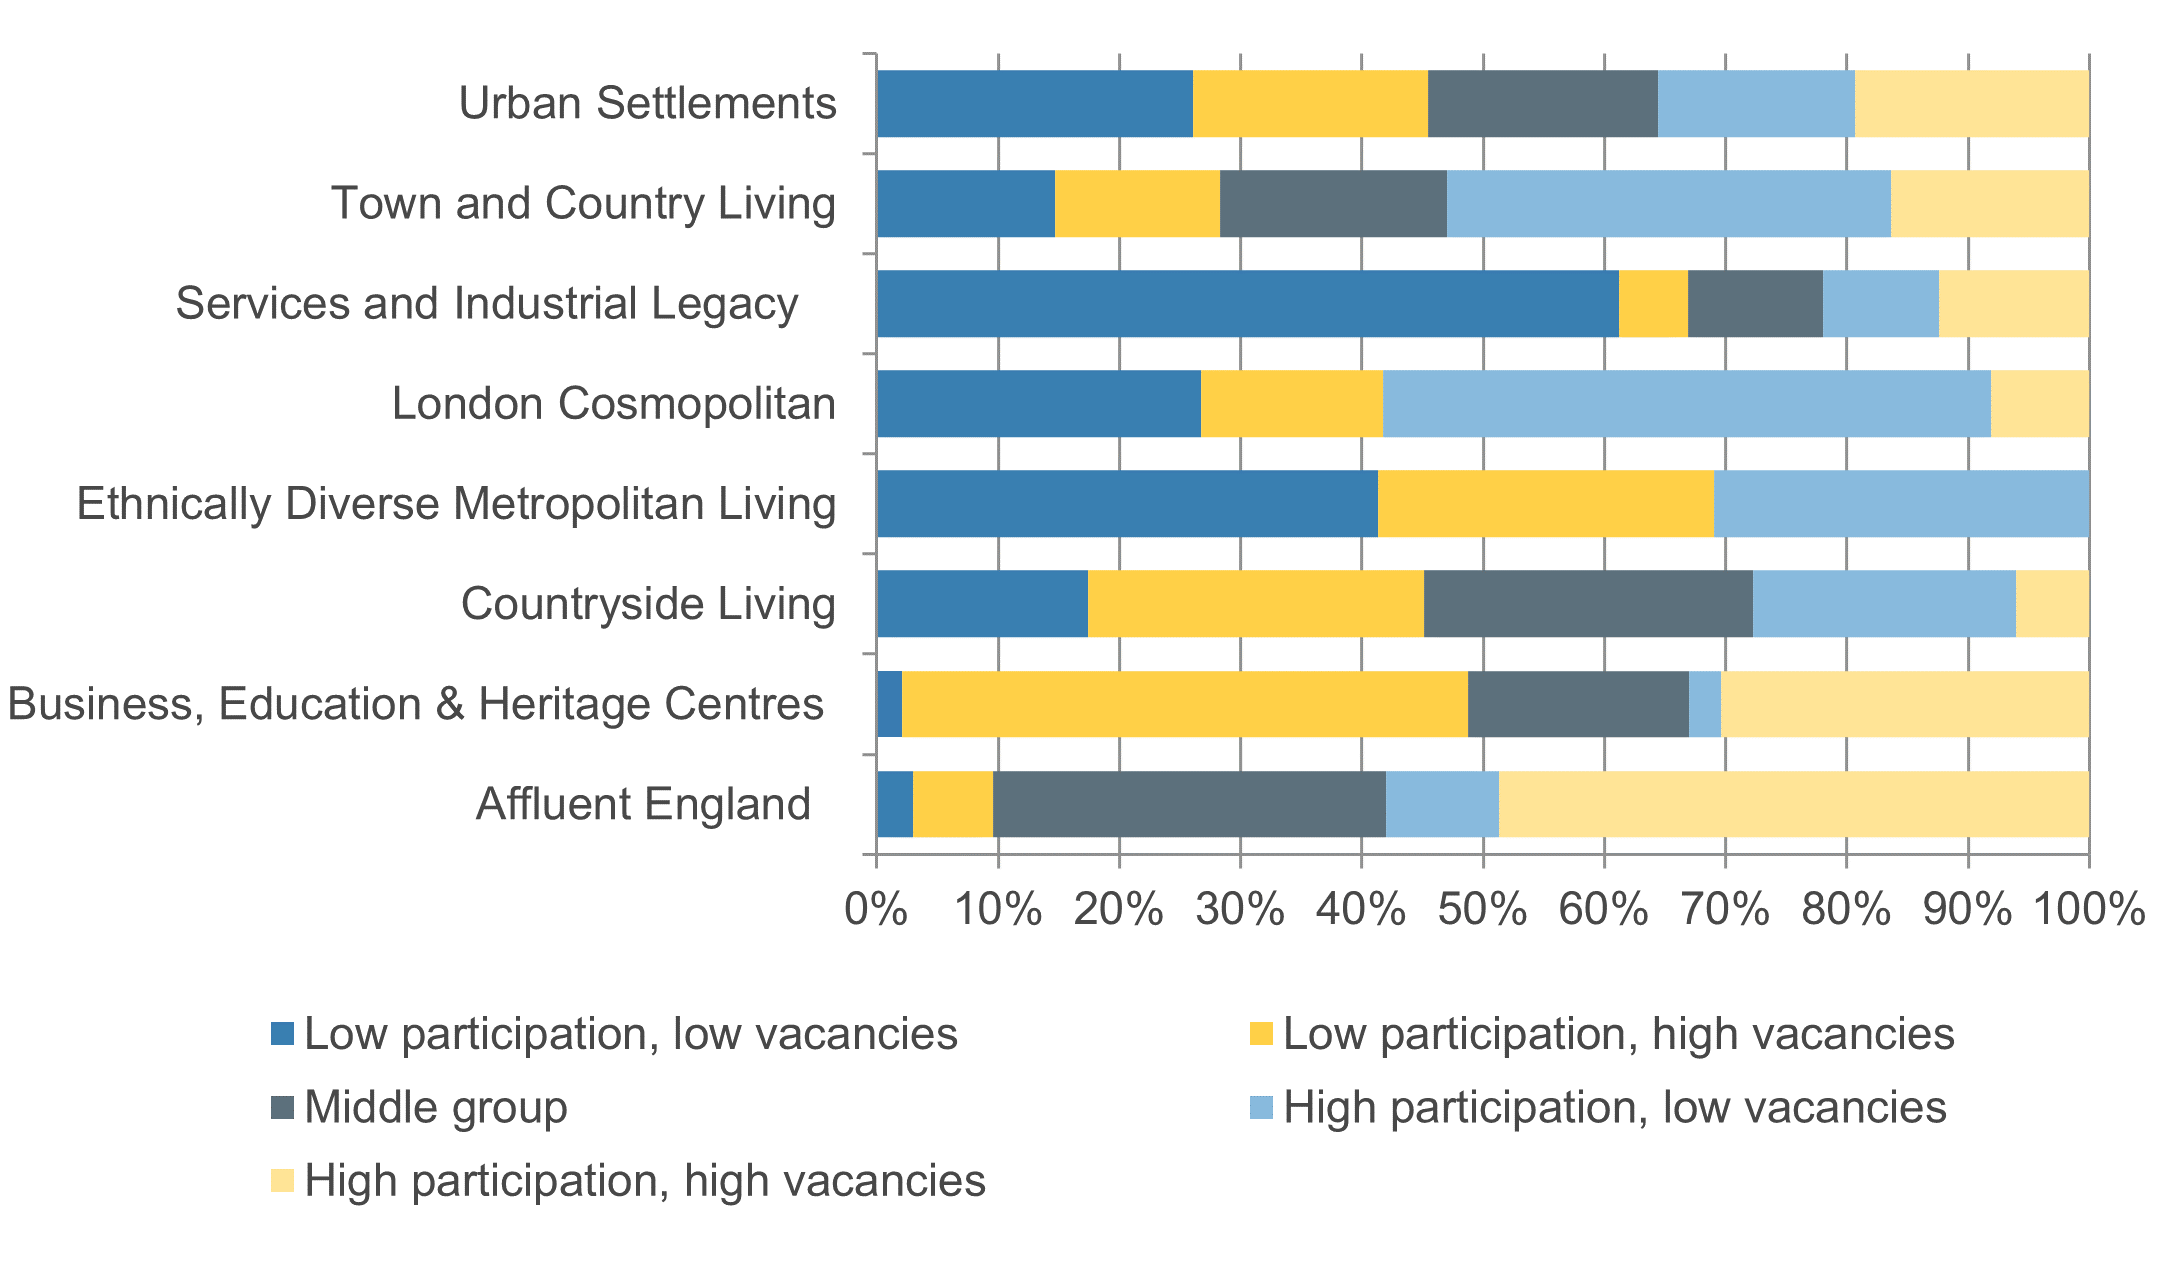 Participation and vacancies by ONS classification